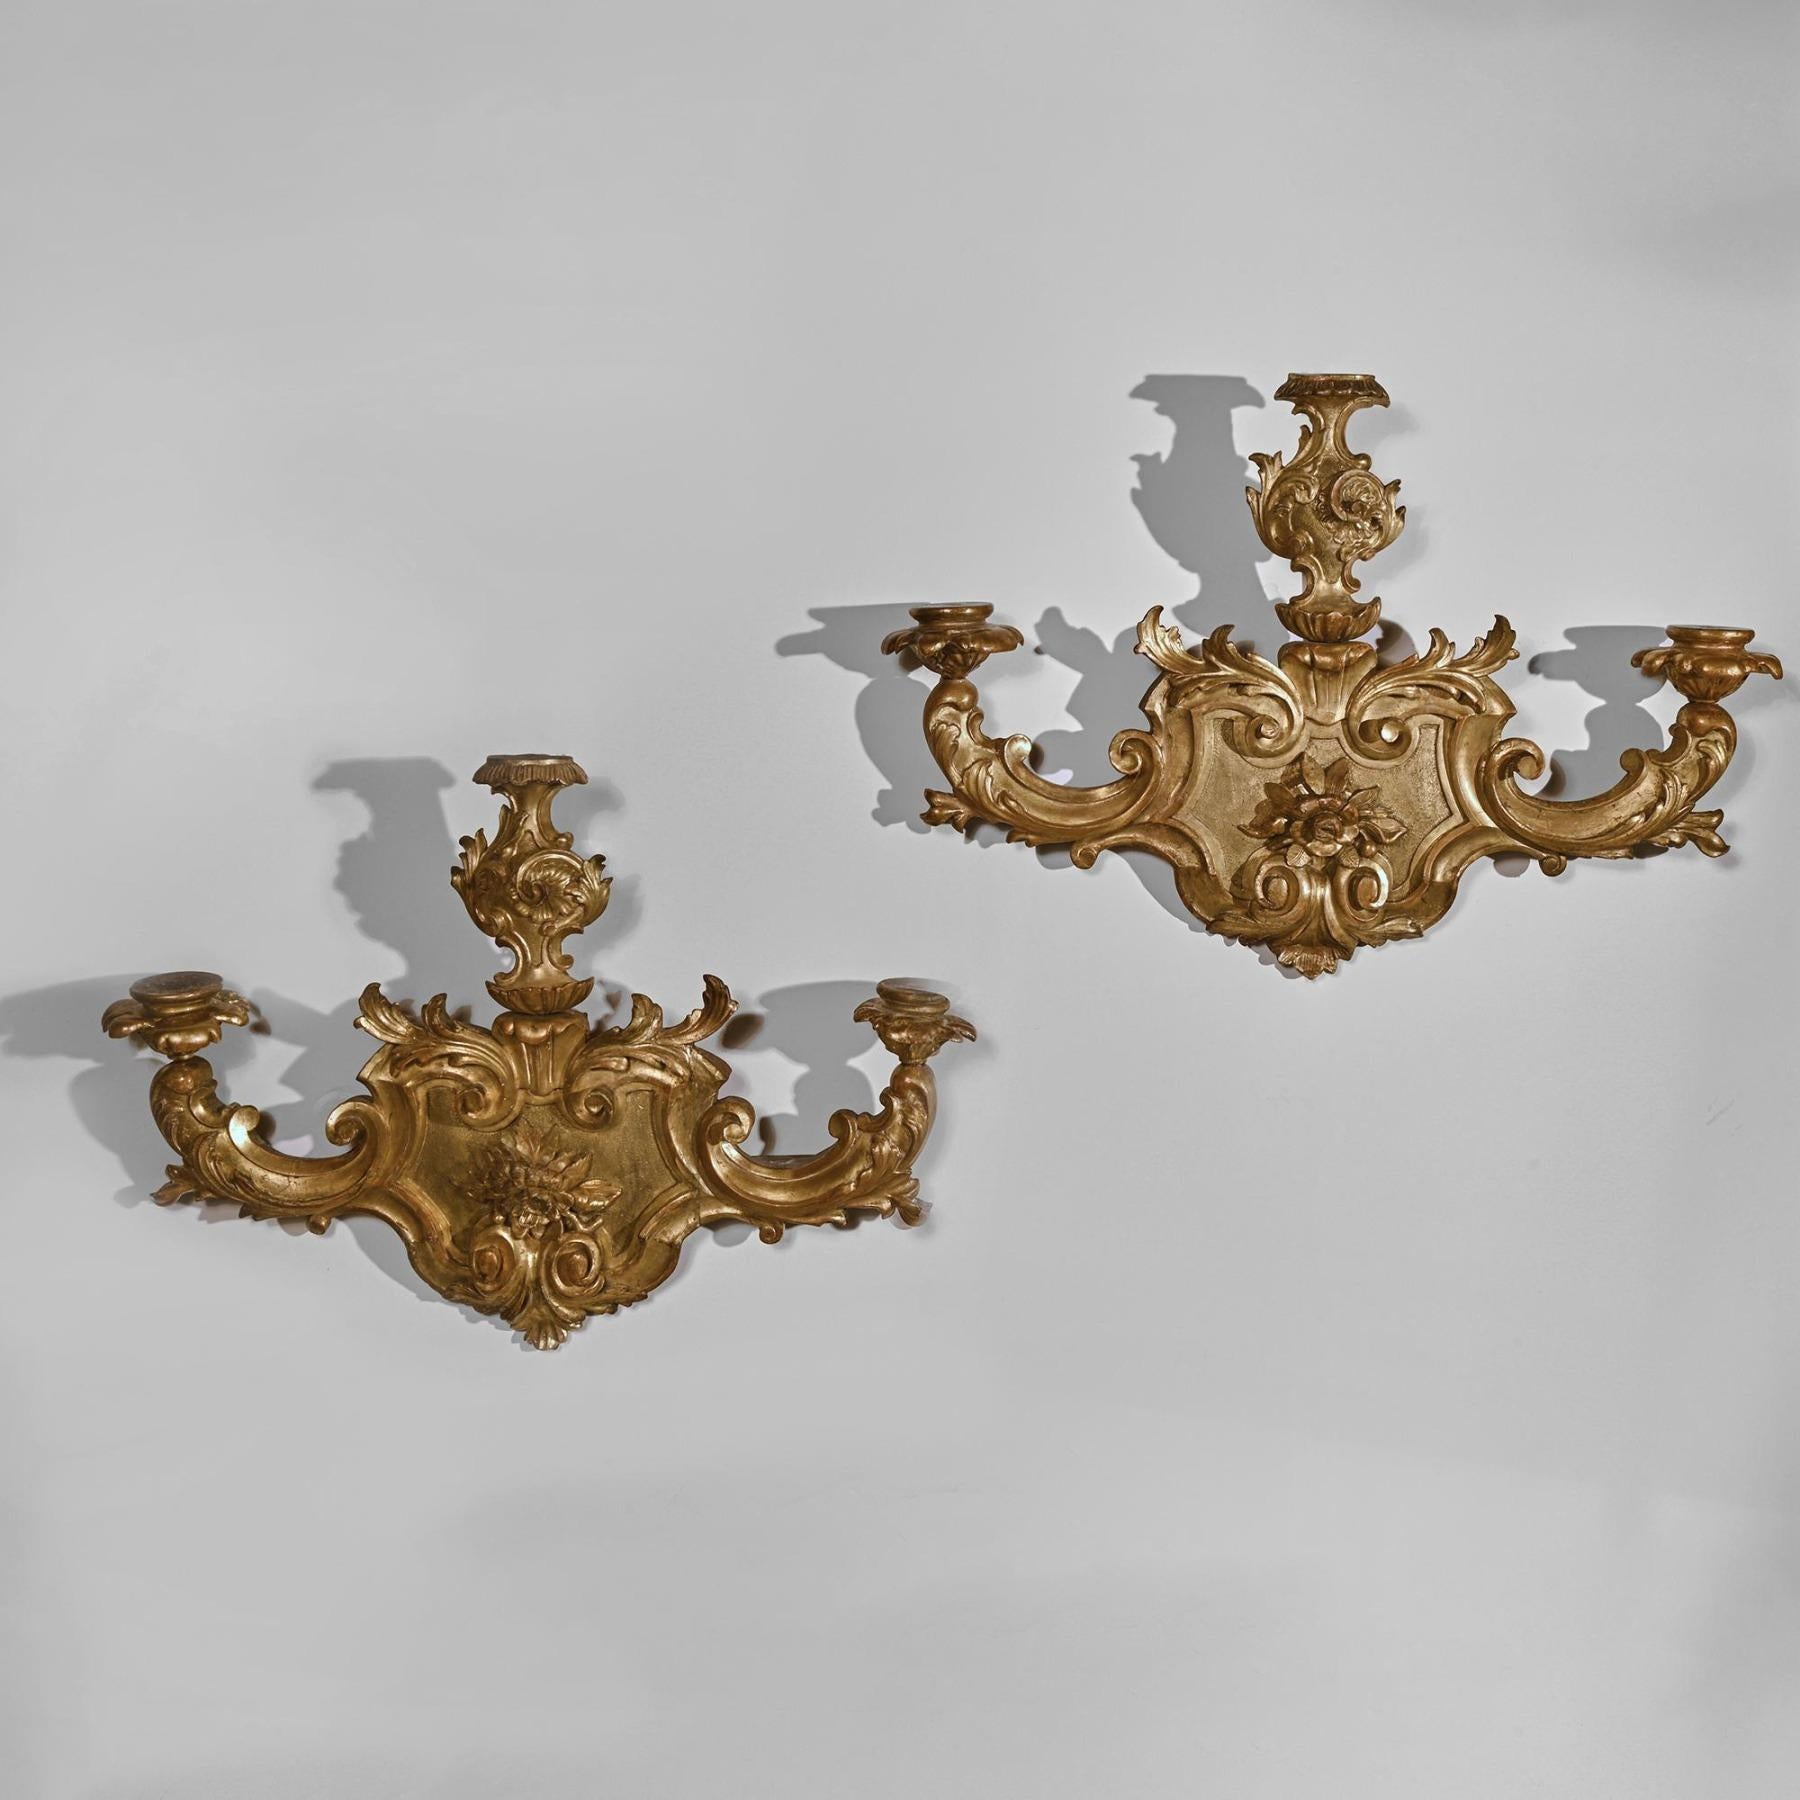 Late 18th Century Pair of 18th Century Venetian Giltwood Wall Sconces For Sale